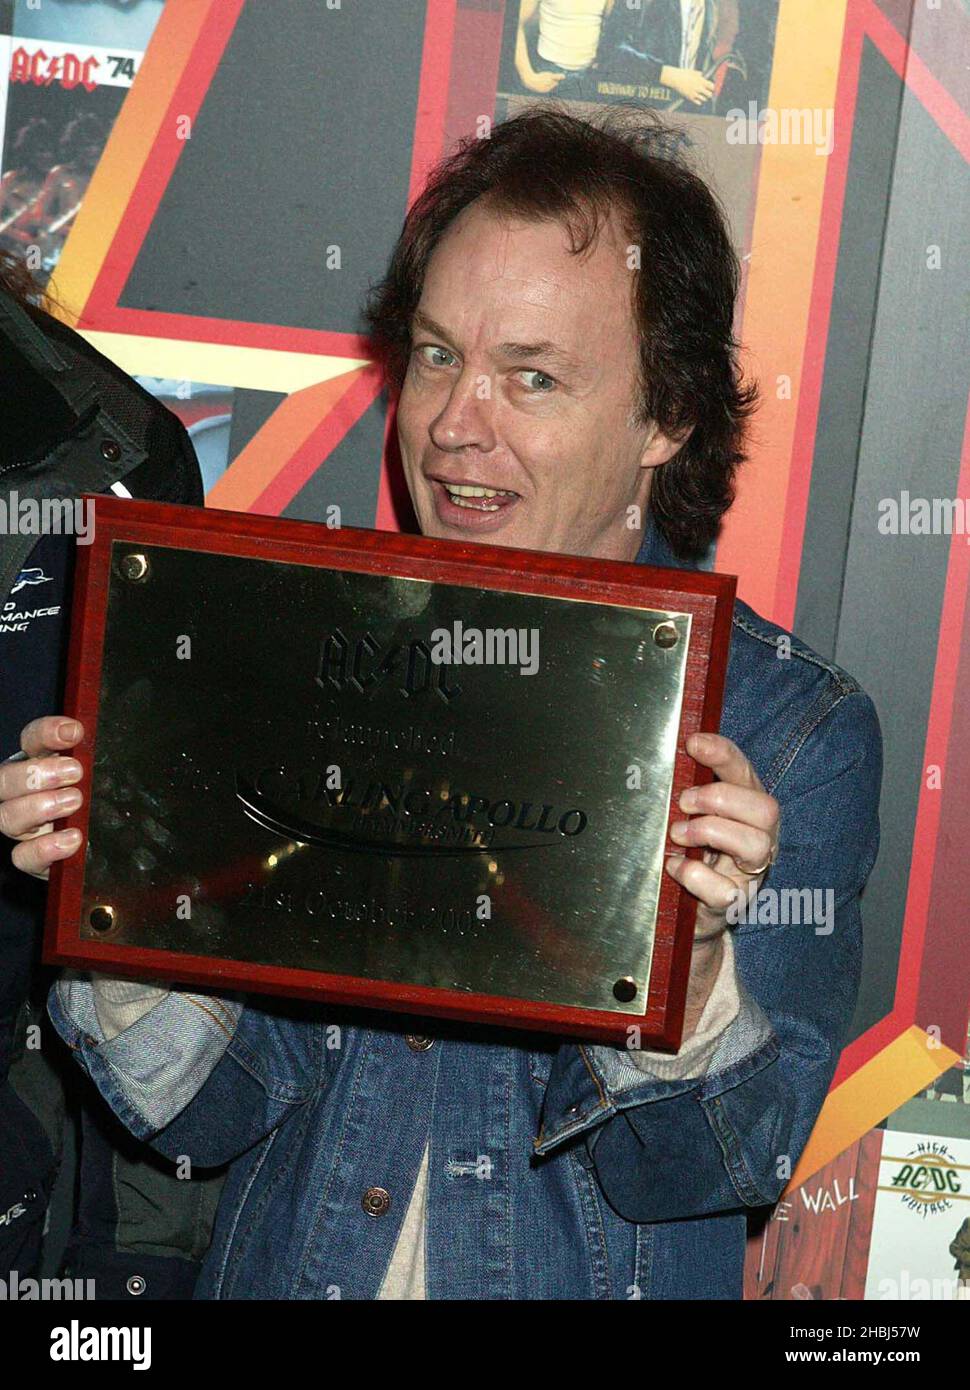 ACDC Photo call at Press Conference at the Hammersmith Apollo. Angus Deaton with award Stock Photo